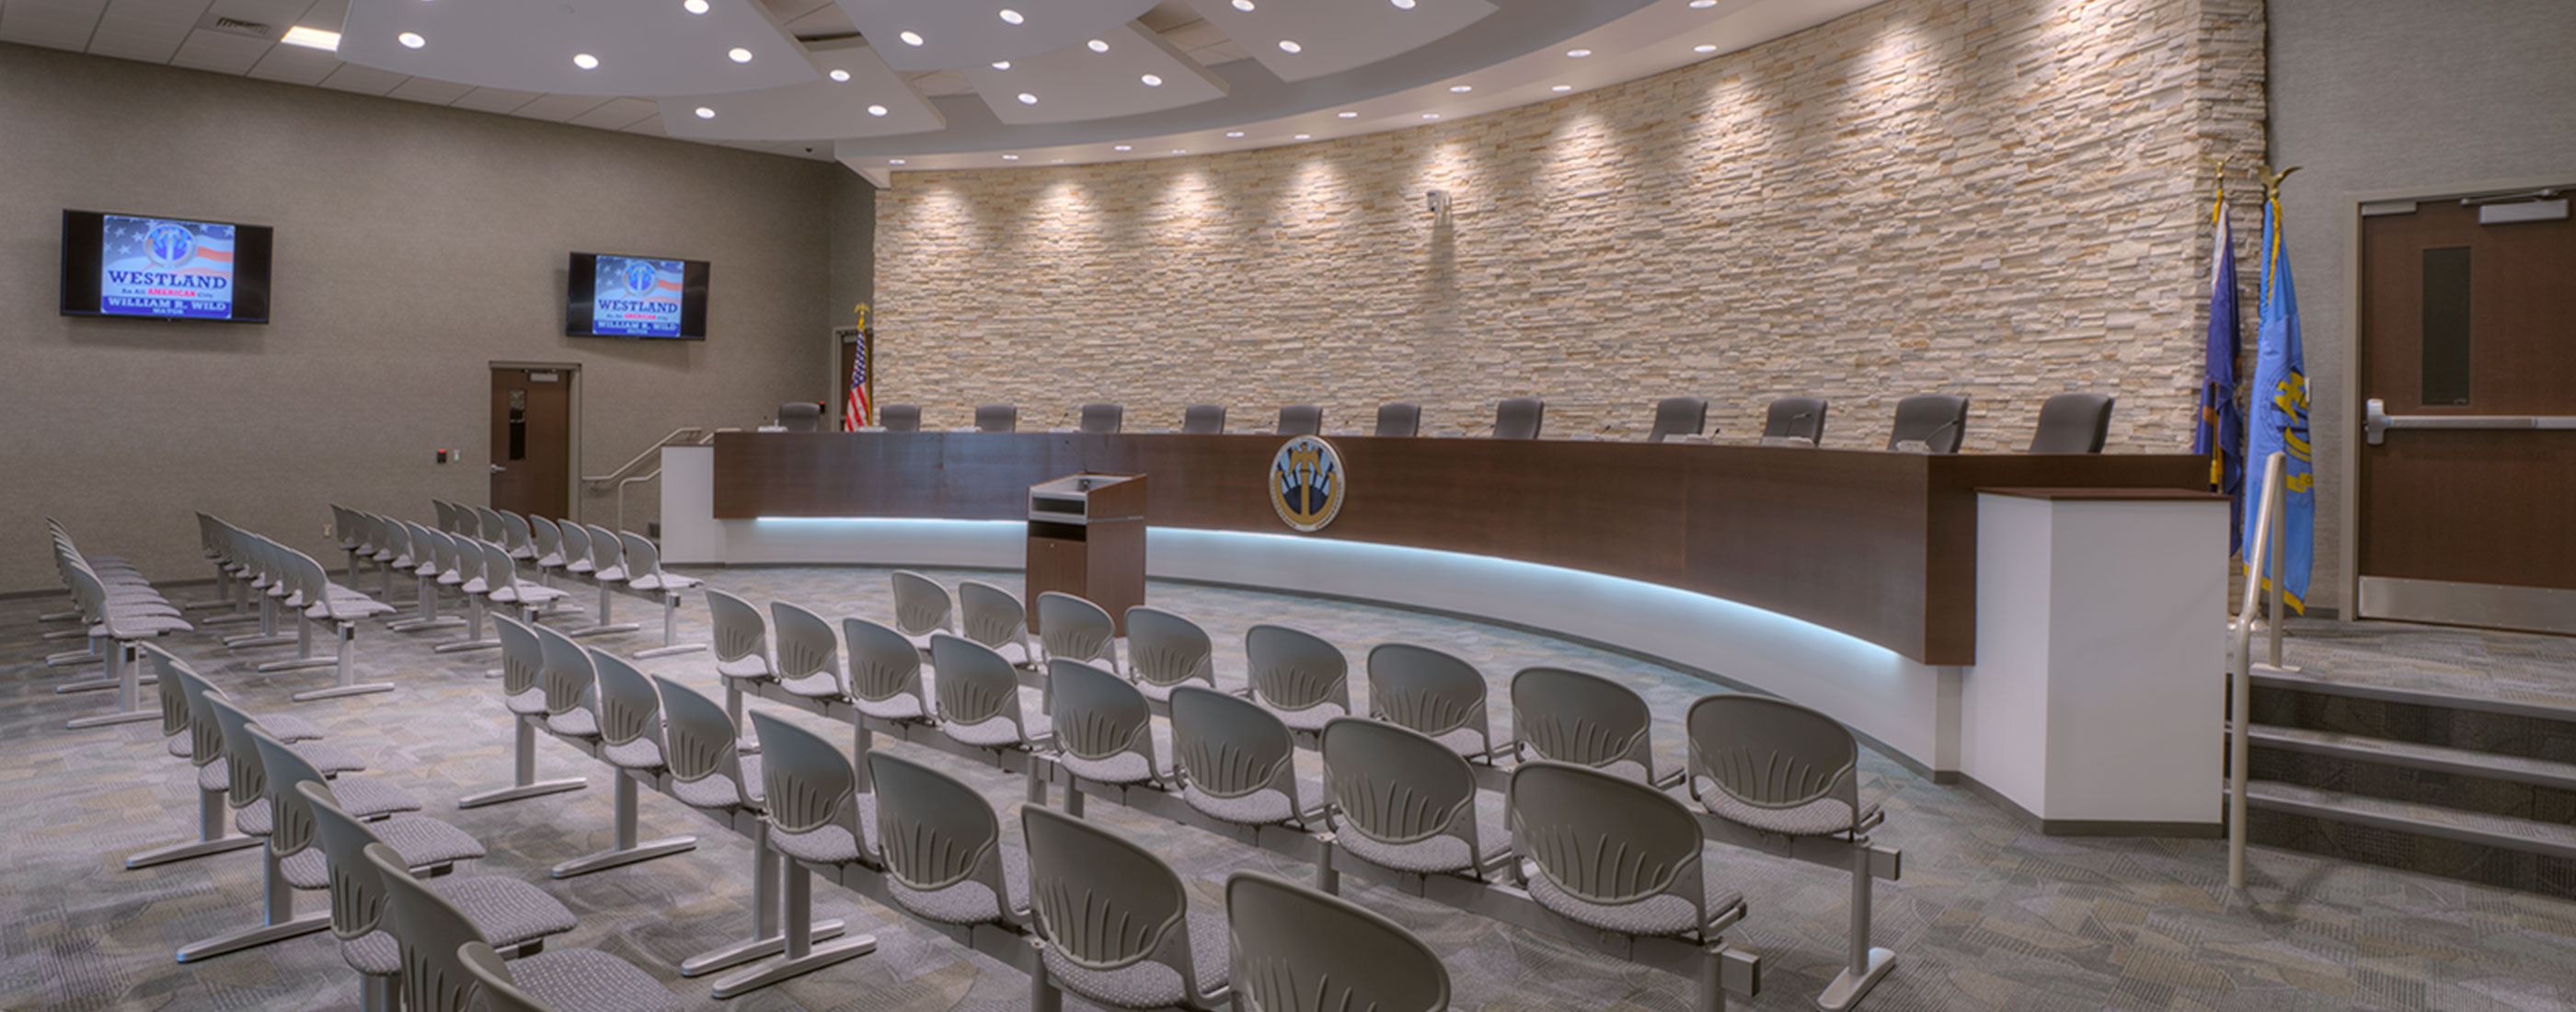 The new city council chambers in Westland, Michigan’s City Hall, designed by OHM Advisors